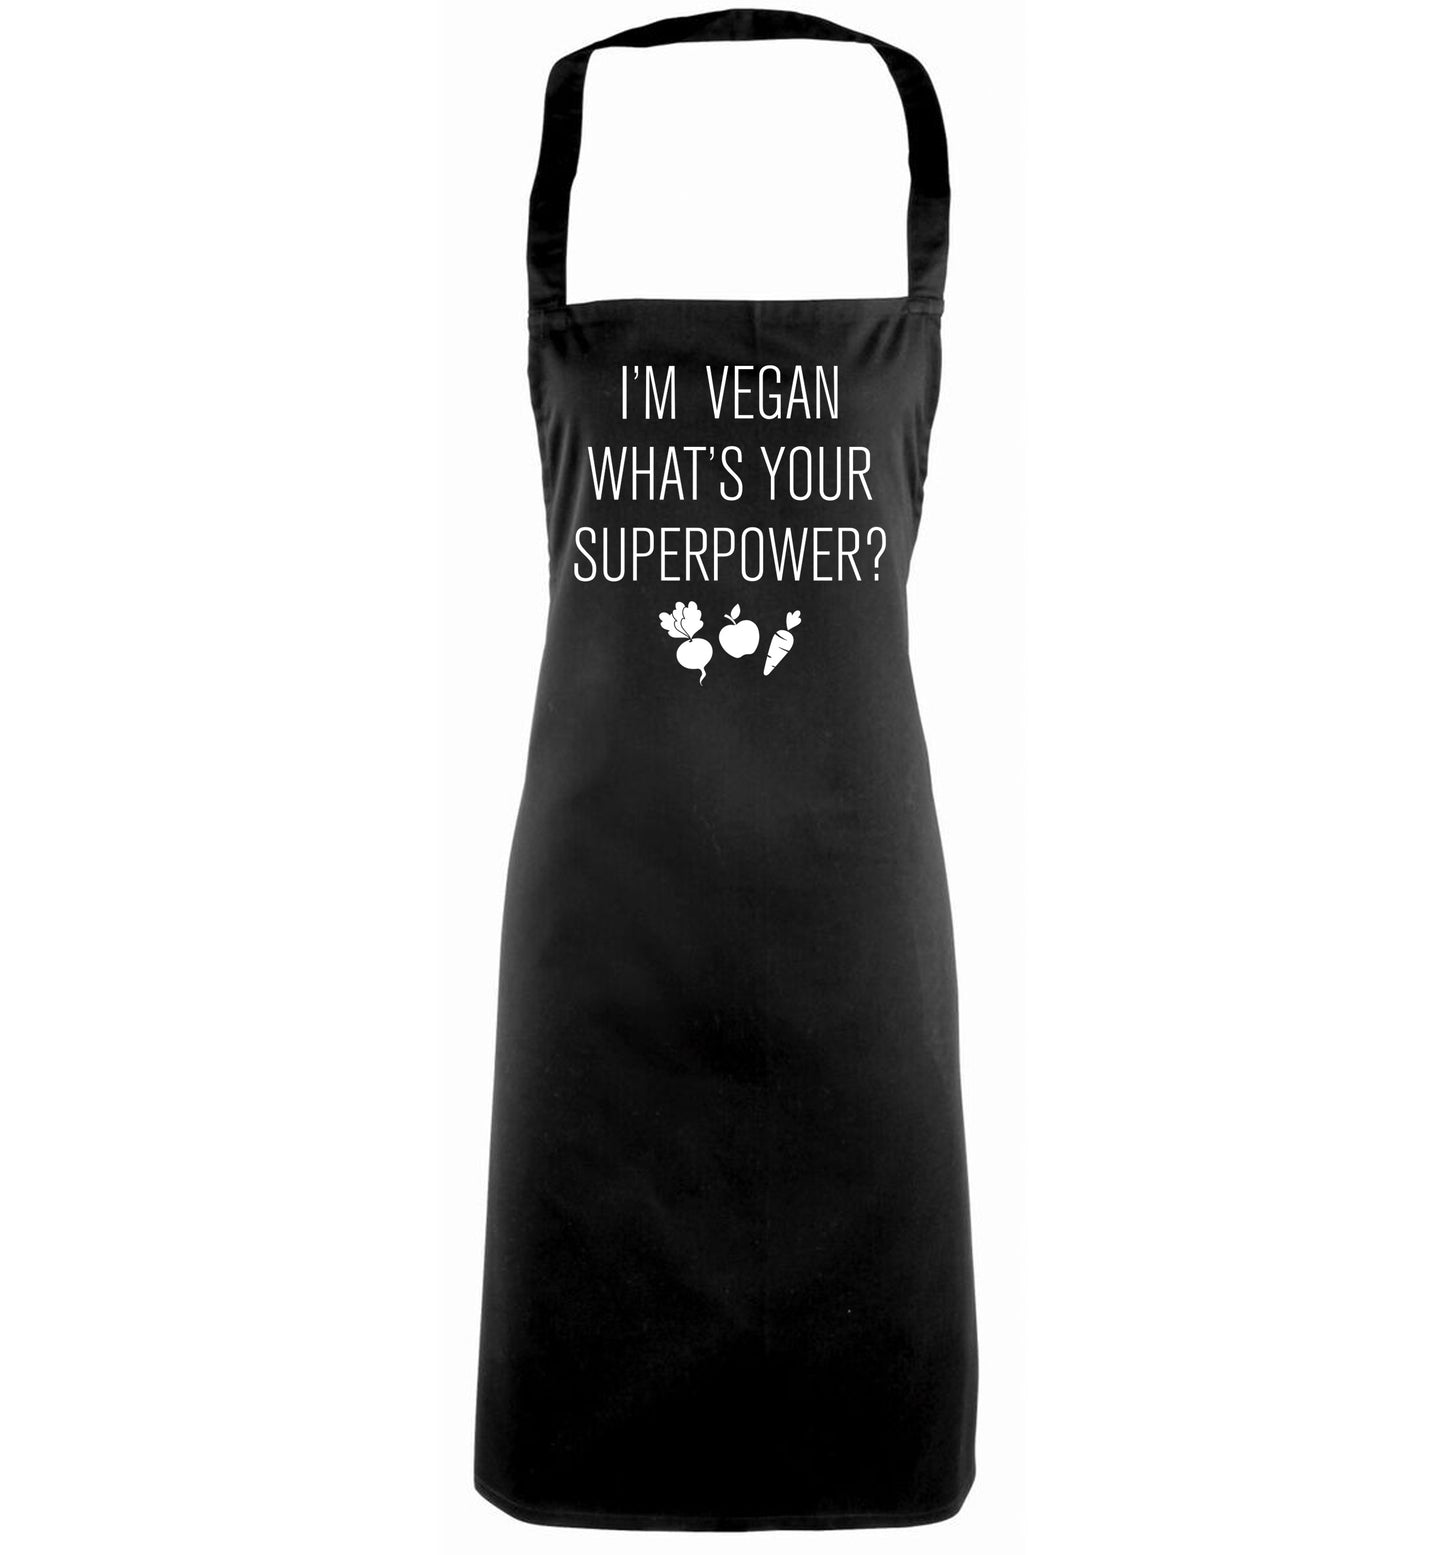 I'm Vegan What's Your Superpower? black apron